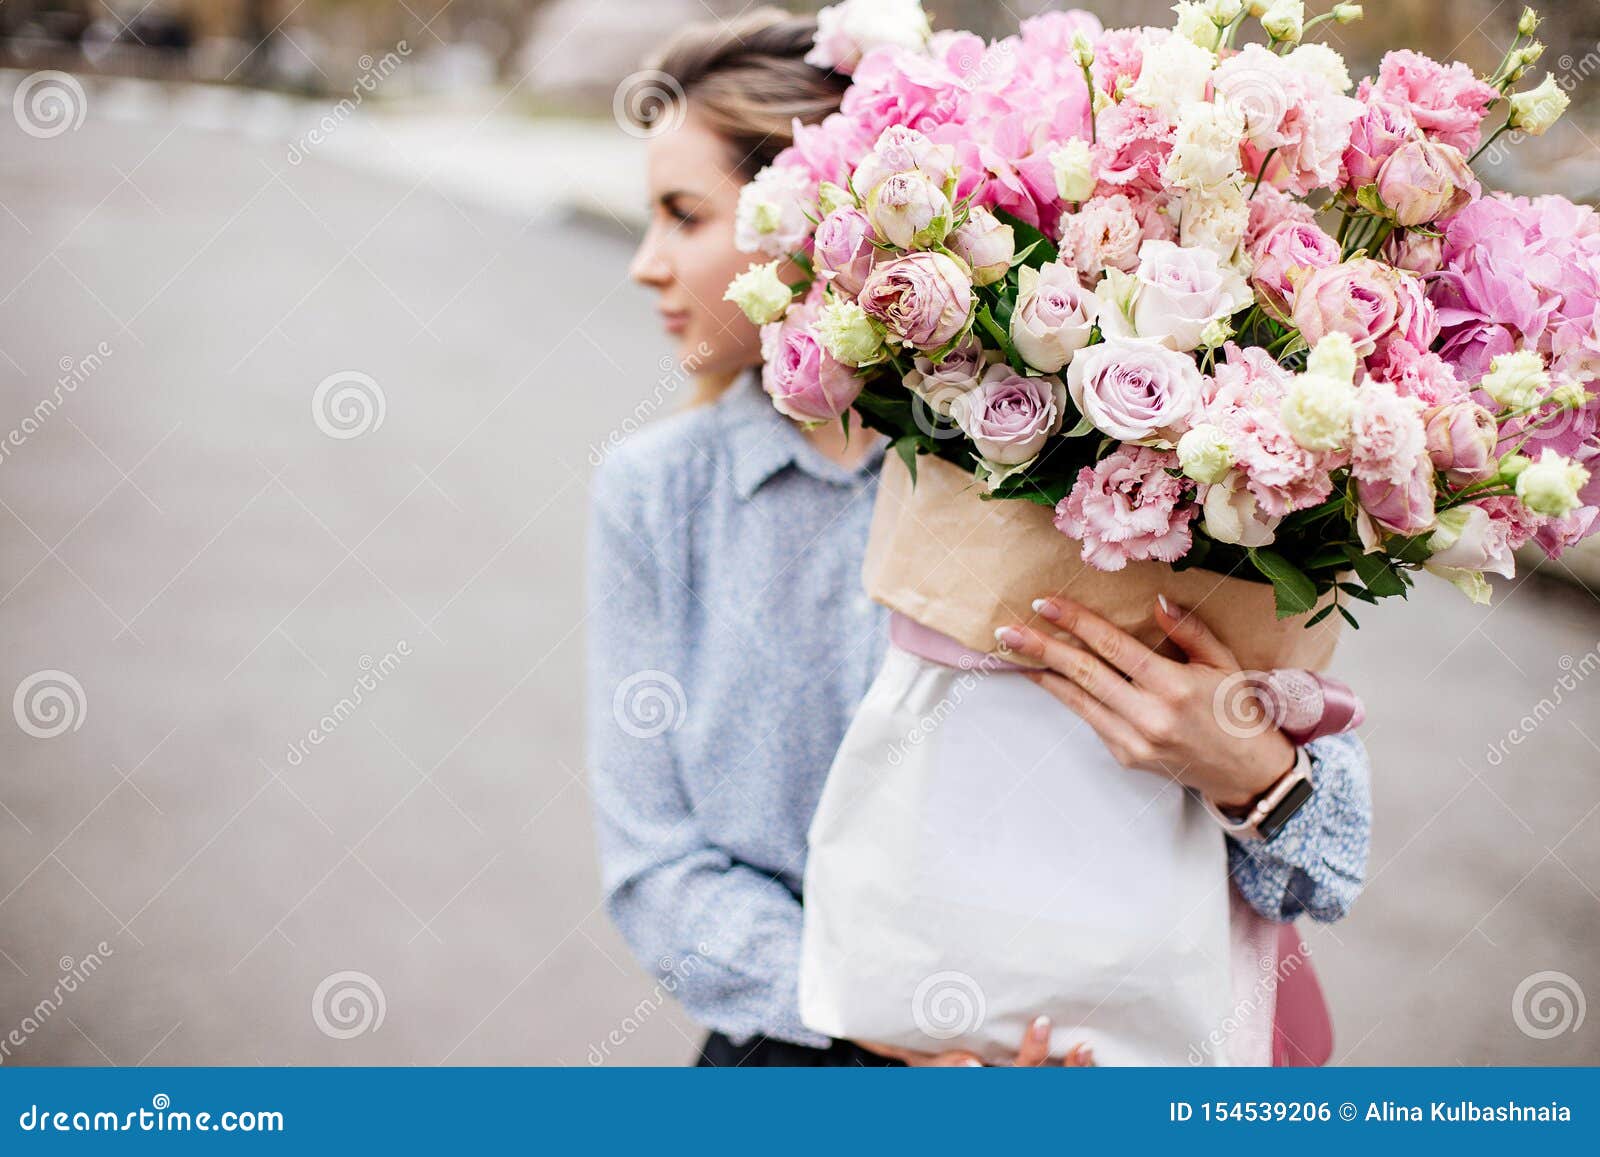 bouquet of flowers in bag.